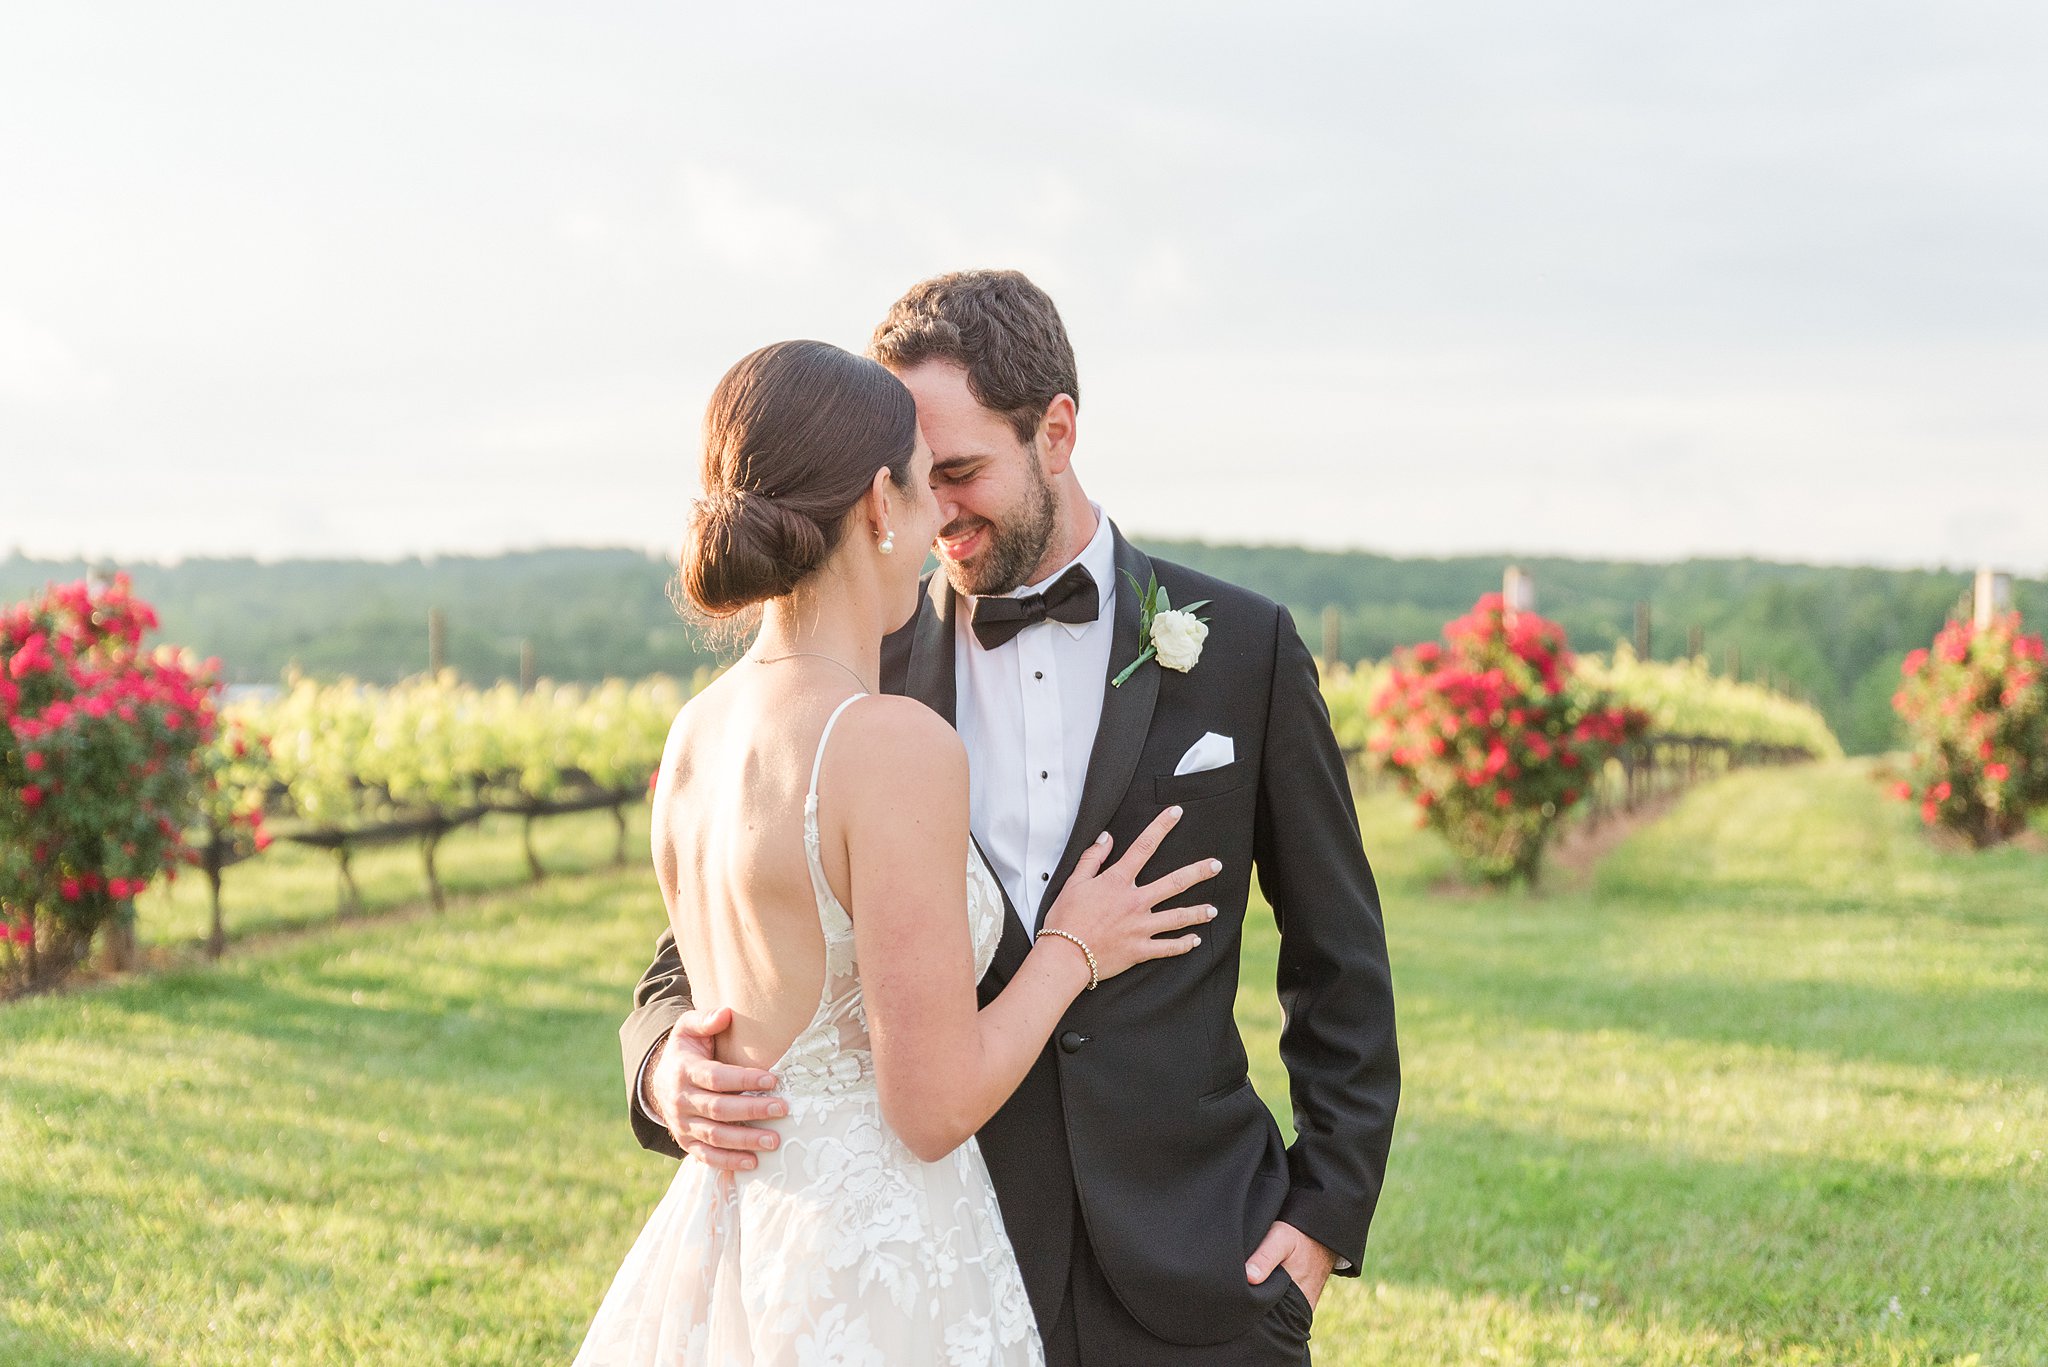 Newlyweds stand in a vineyard touching foreheads and smiling at sunset